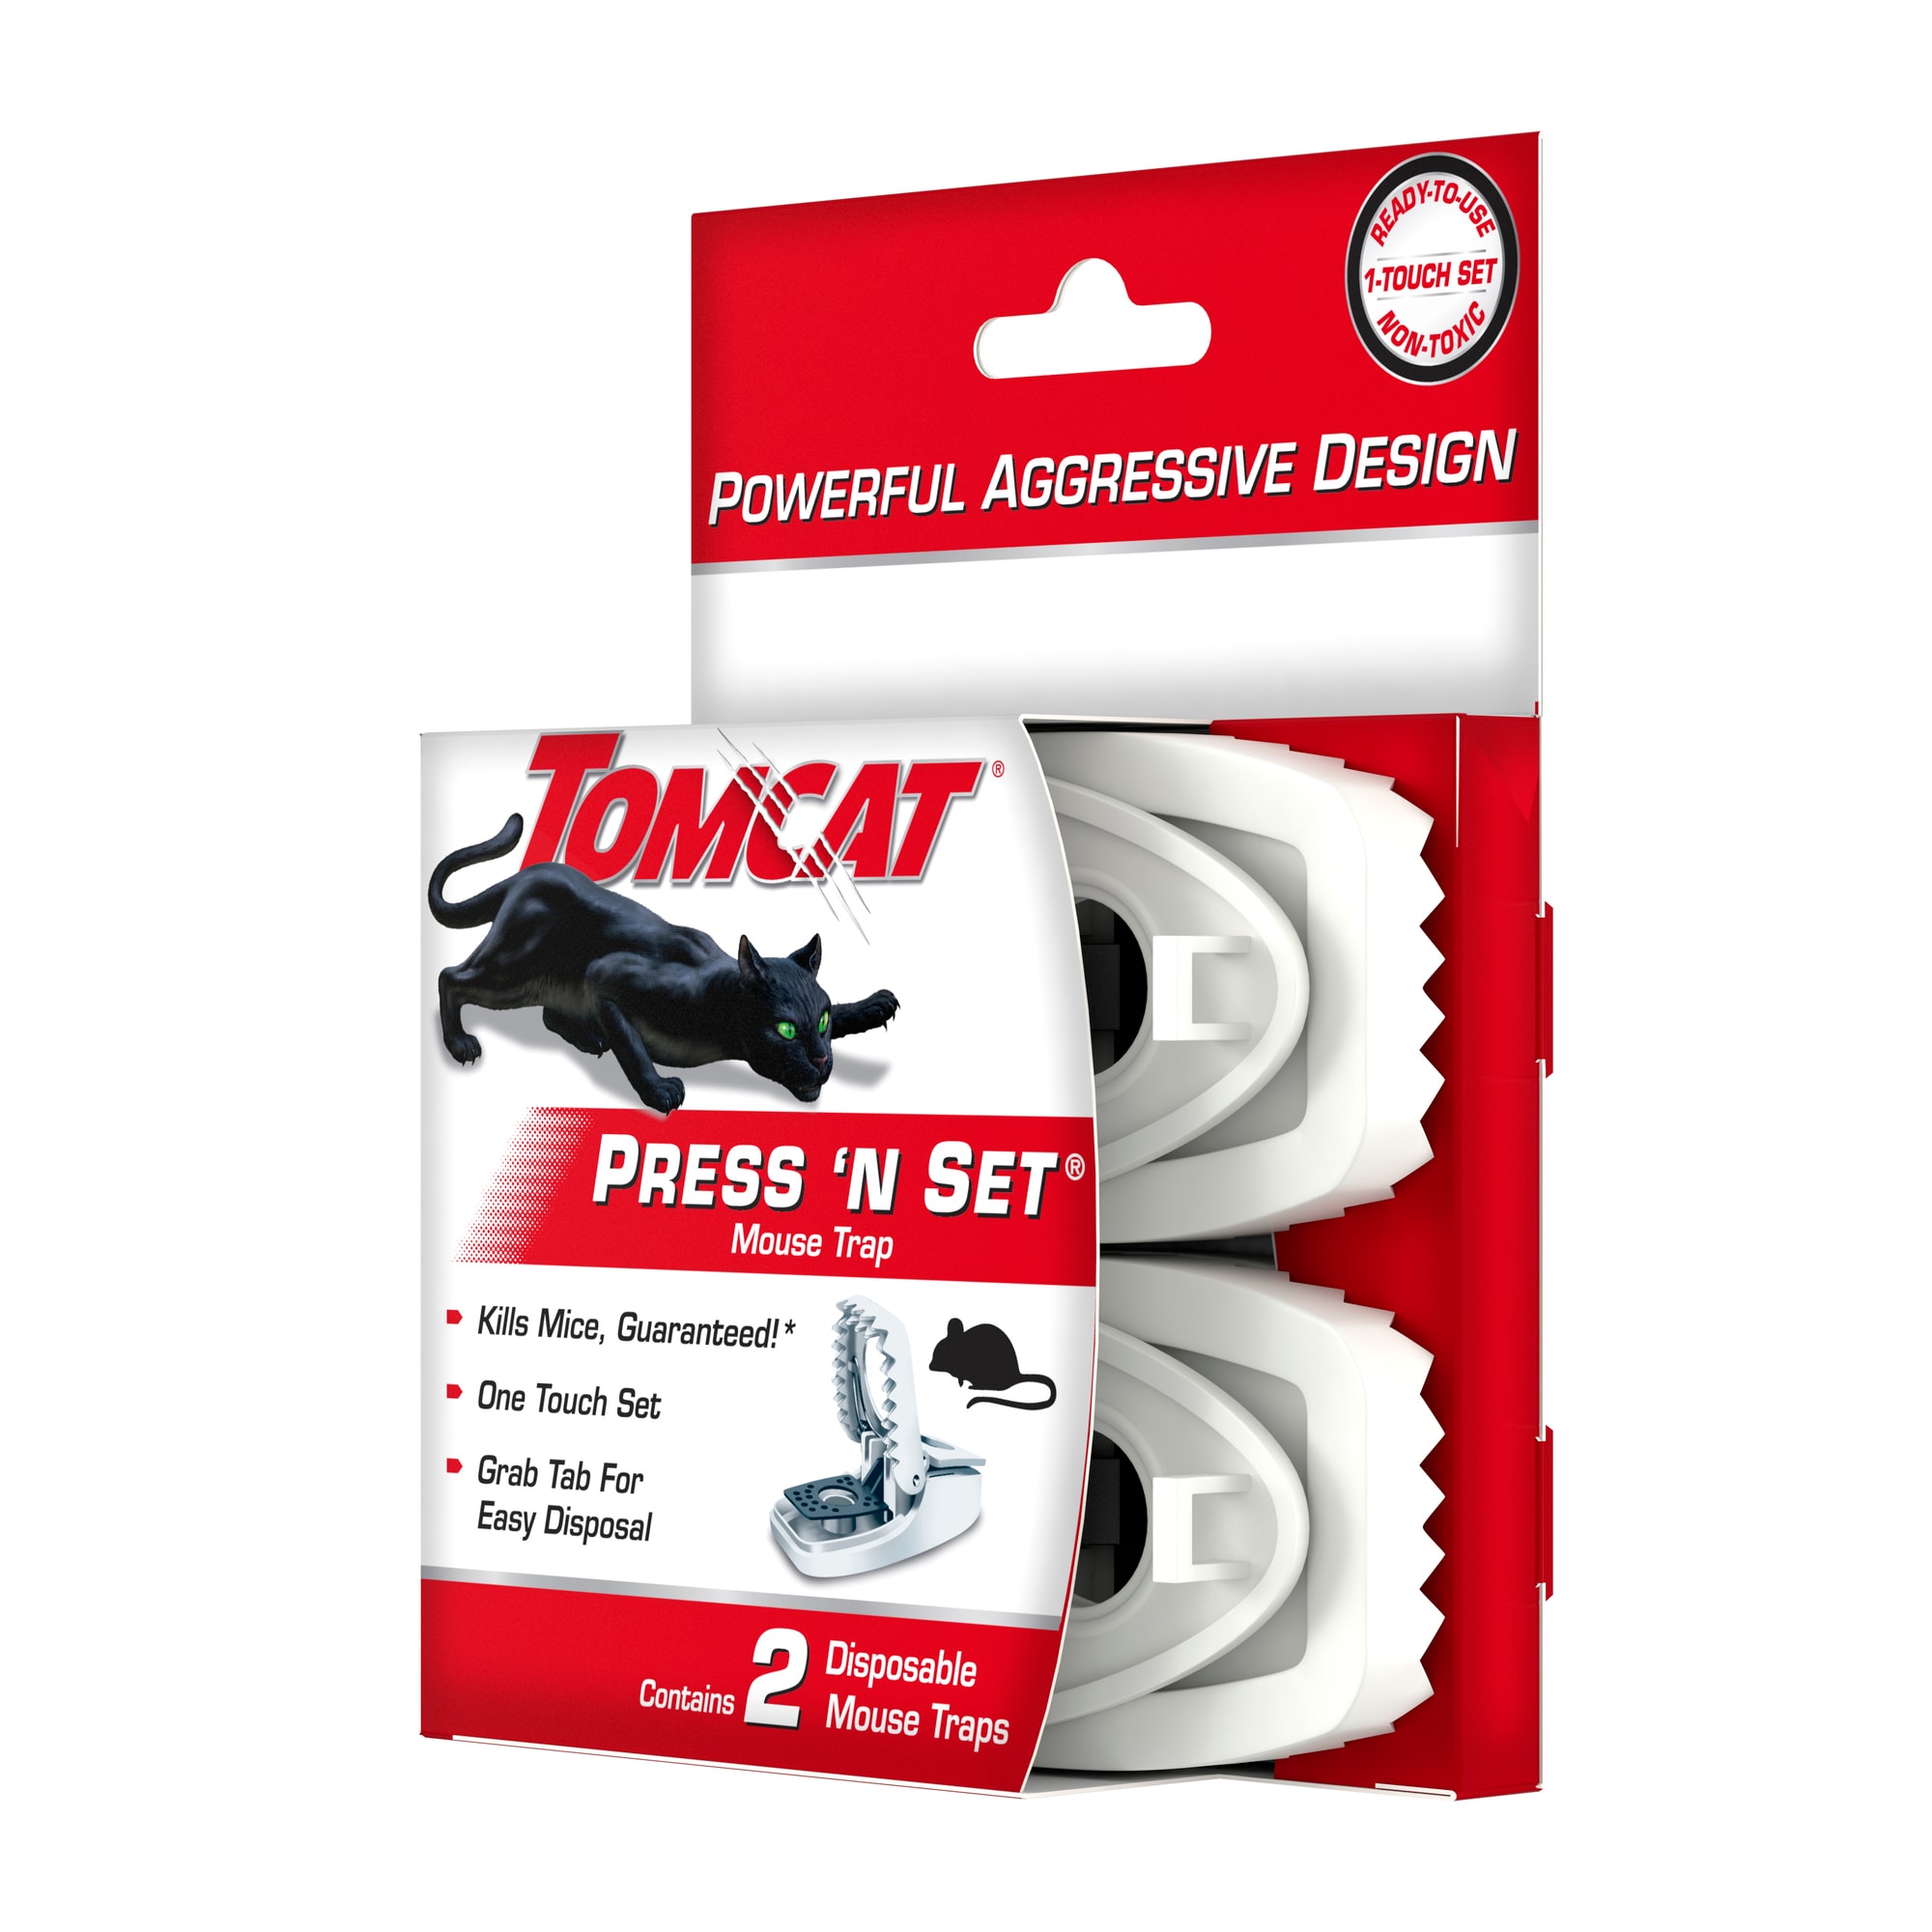 TOMCAT Press 'N Set Trap Mouse in the Animal & Rodent Control department at